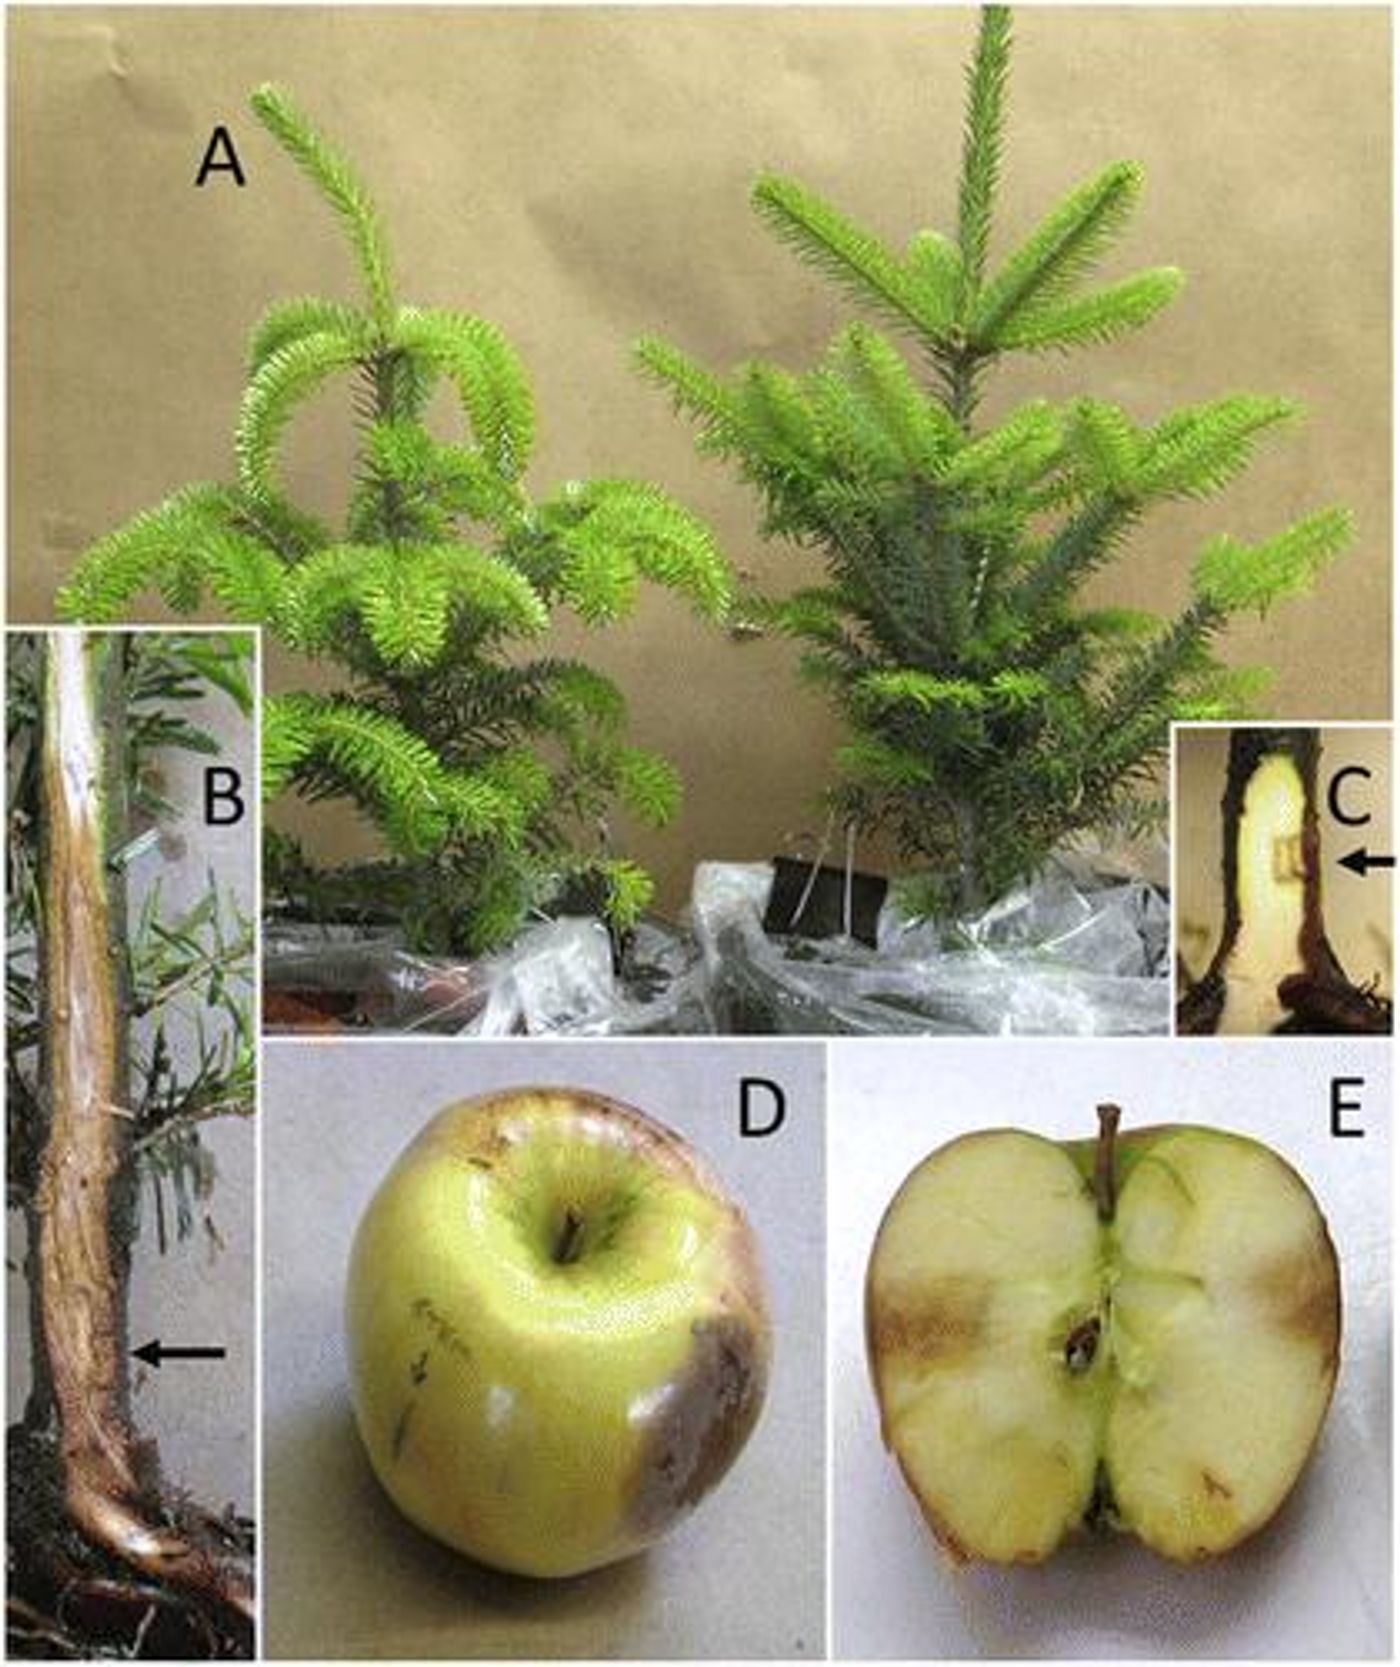 Representative potted Abies fraseri and inoculated apples (used for Koch's postulates, which demonstrate a causative relationship between a microbe and a disease). / Credit: De-Wei Li, Neil P. Schultes, James A. LaMondia, and Richard S. Cowles